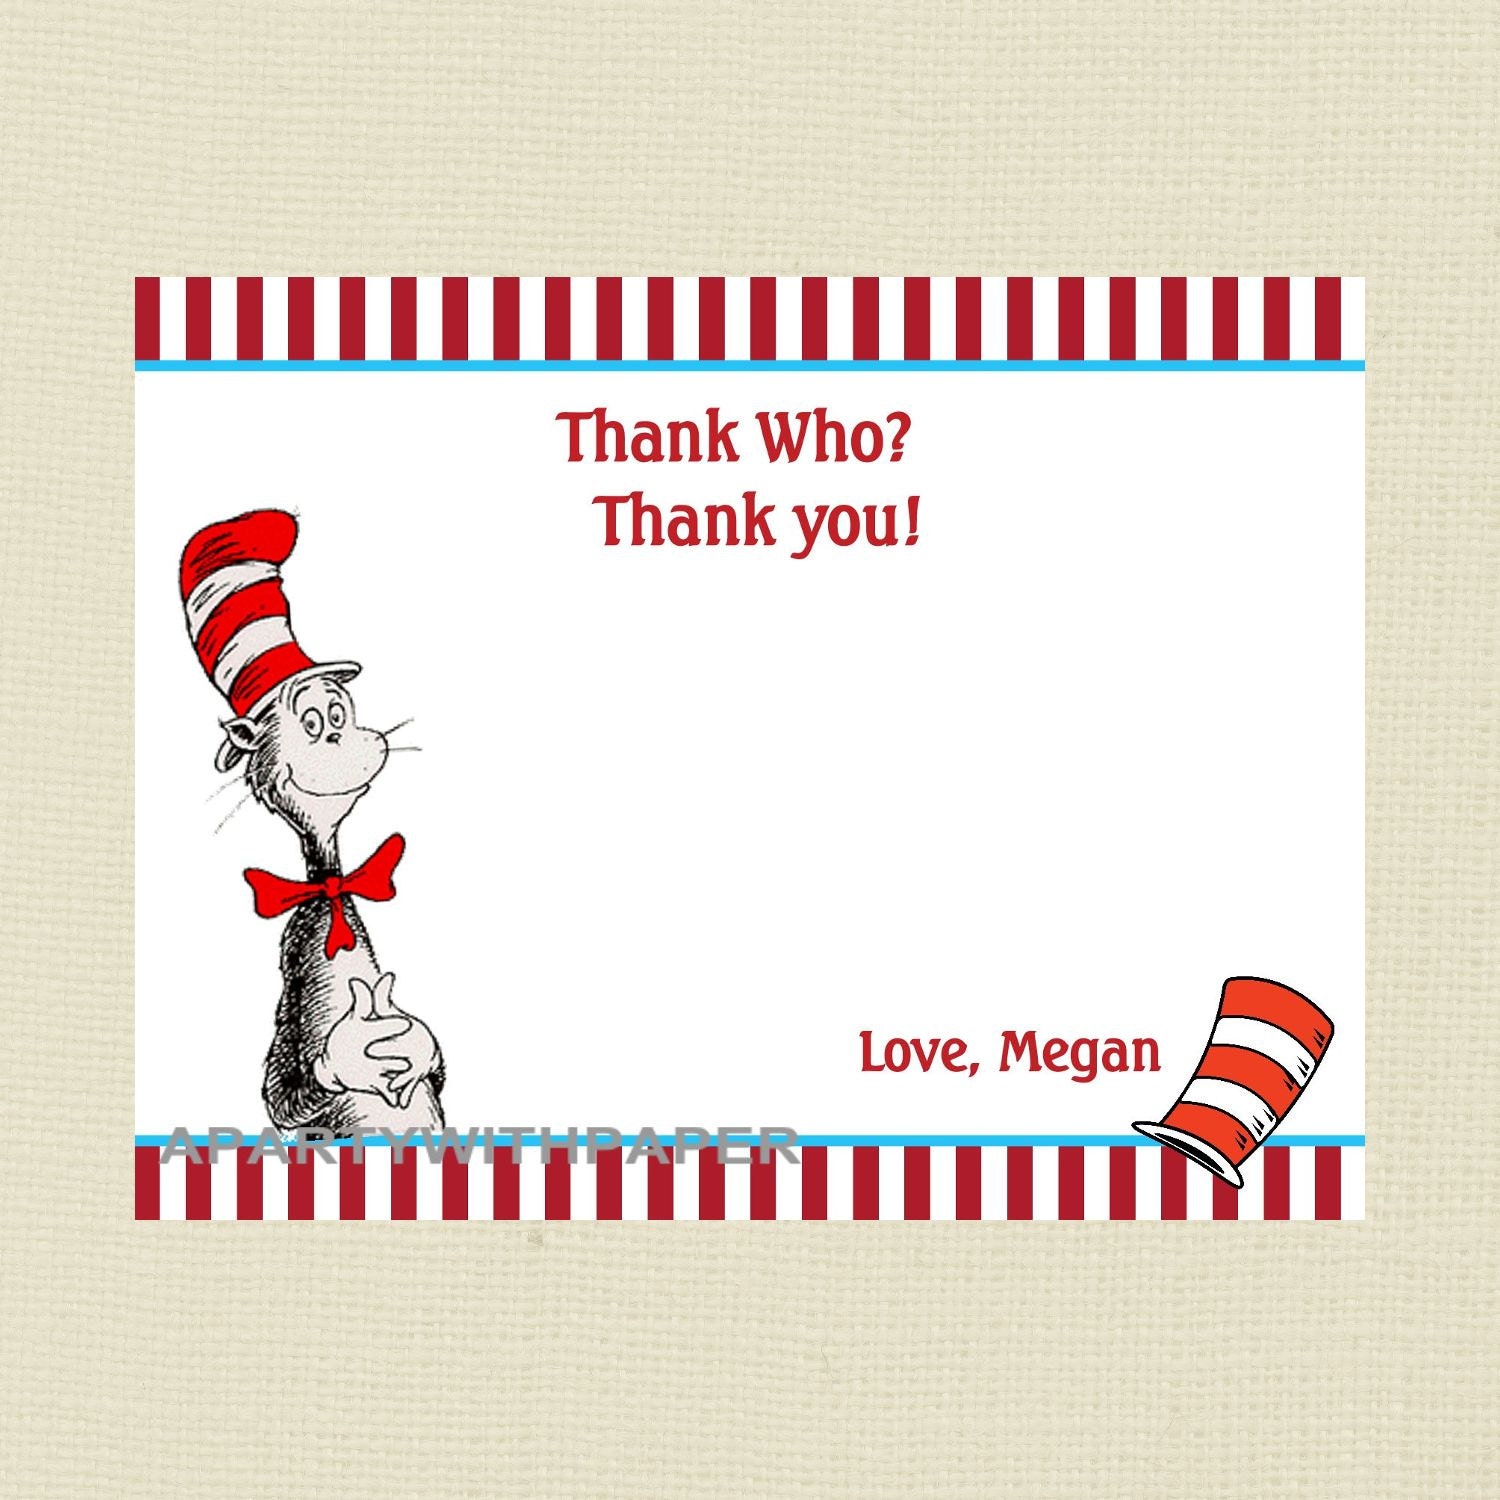 Dr SUESS Thank You Cards by APartyWithPaper on Etsy